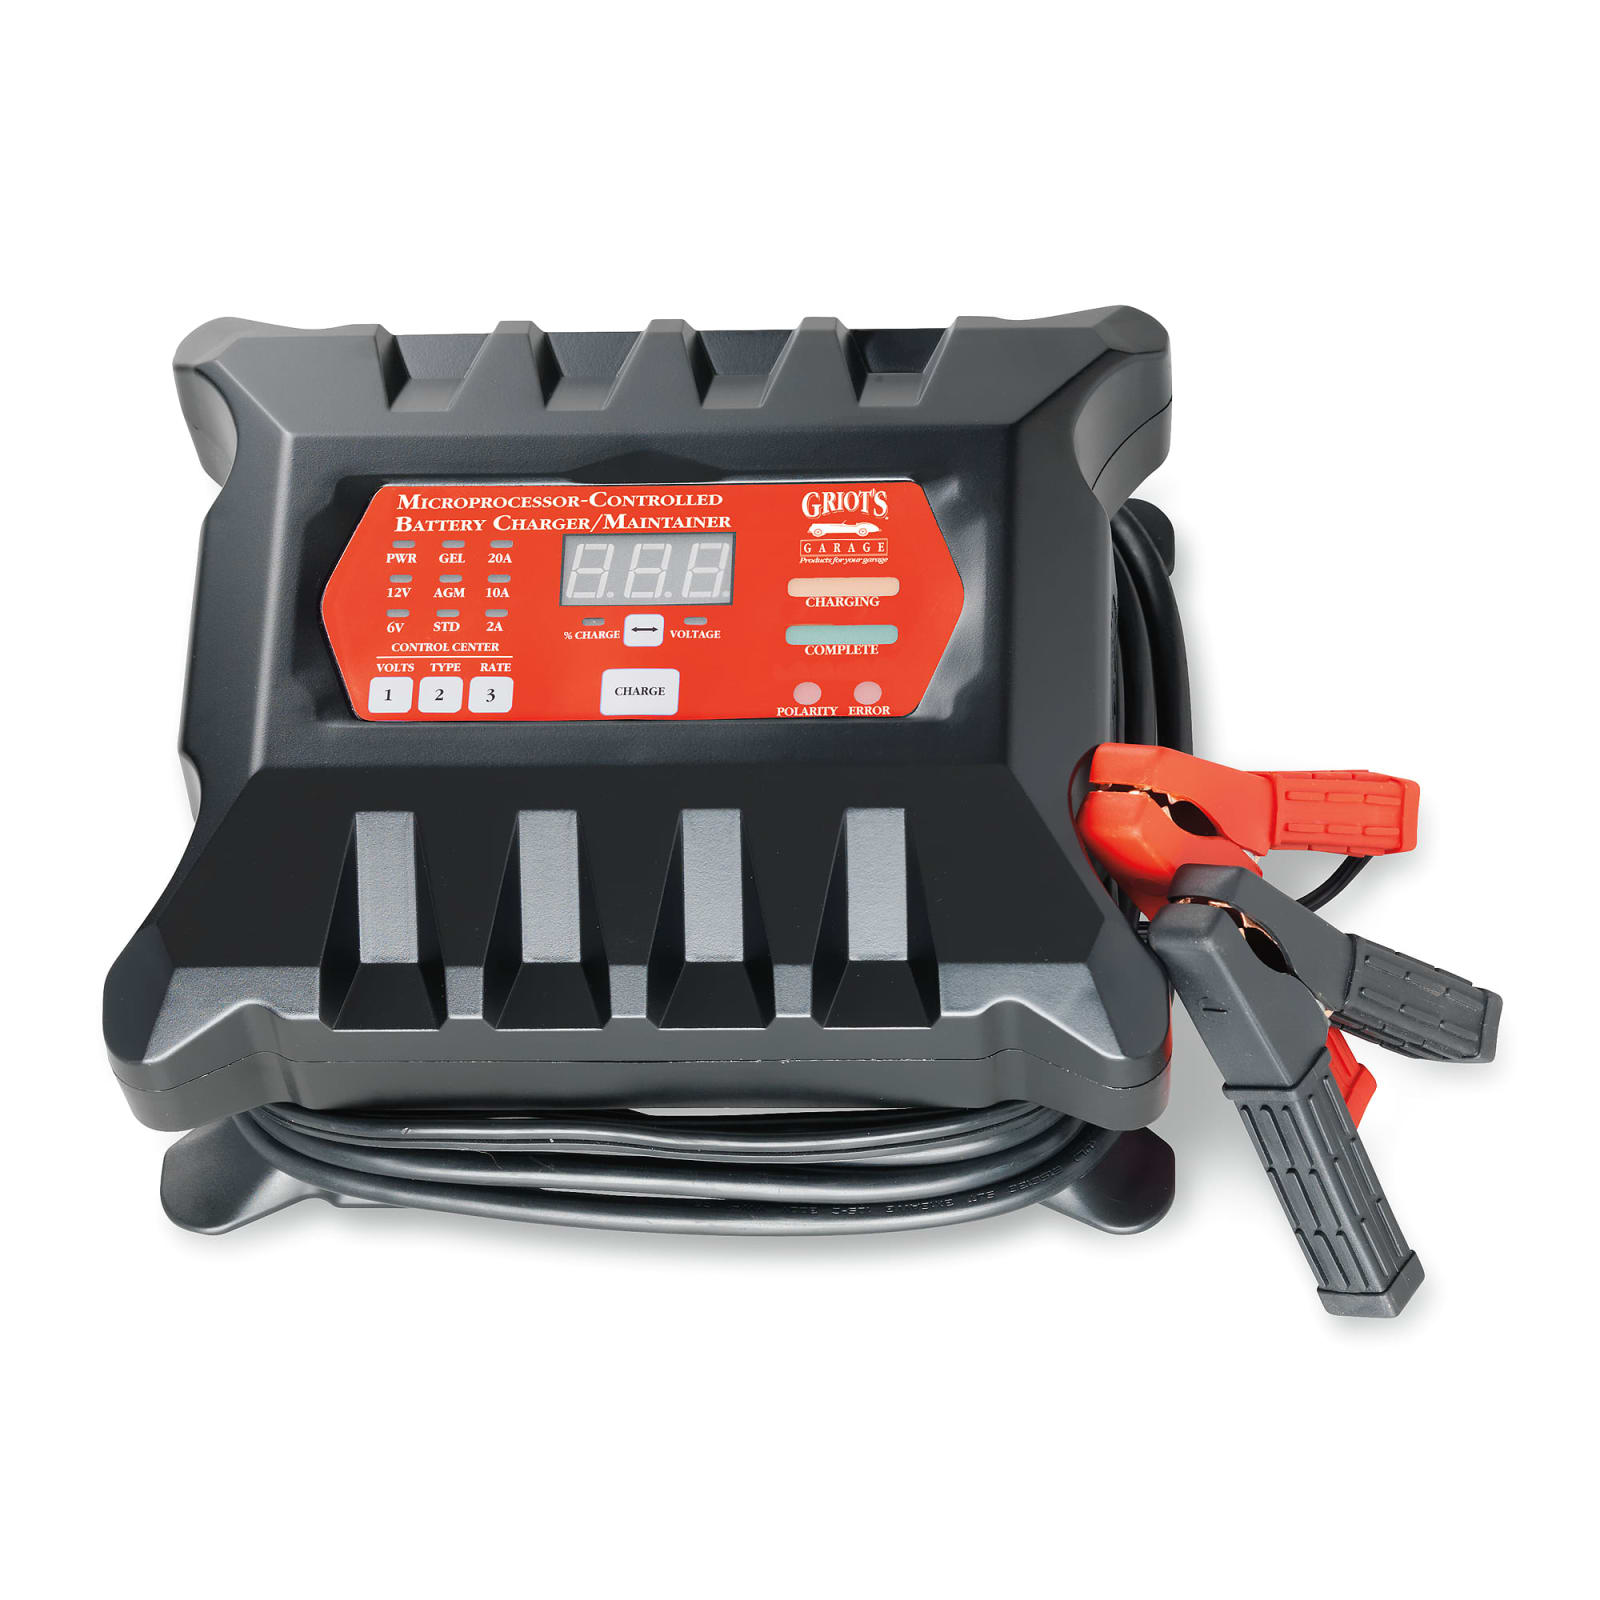 Instruction Manual: 6 Volt / 12 Volt Automatic Battery Maintainer, PDF, Battery  Charger